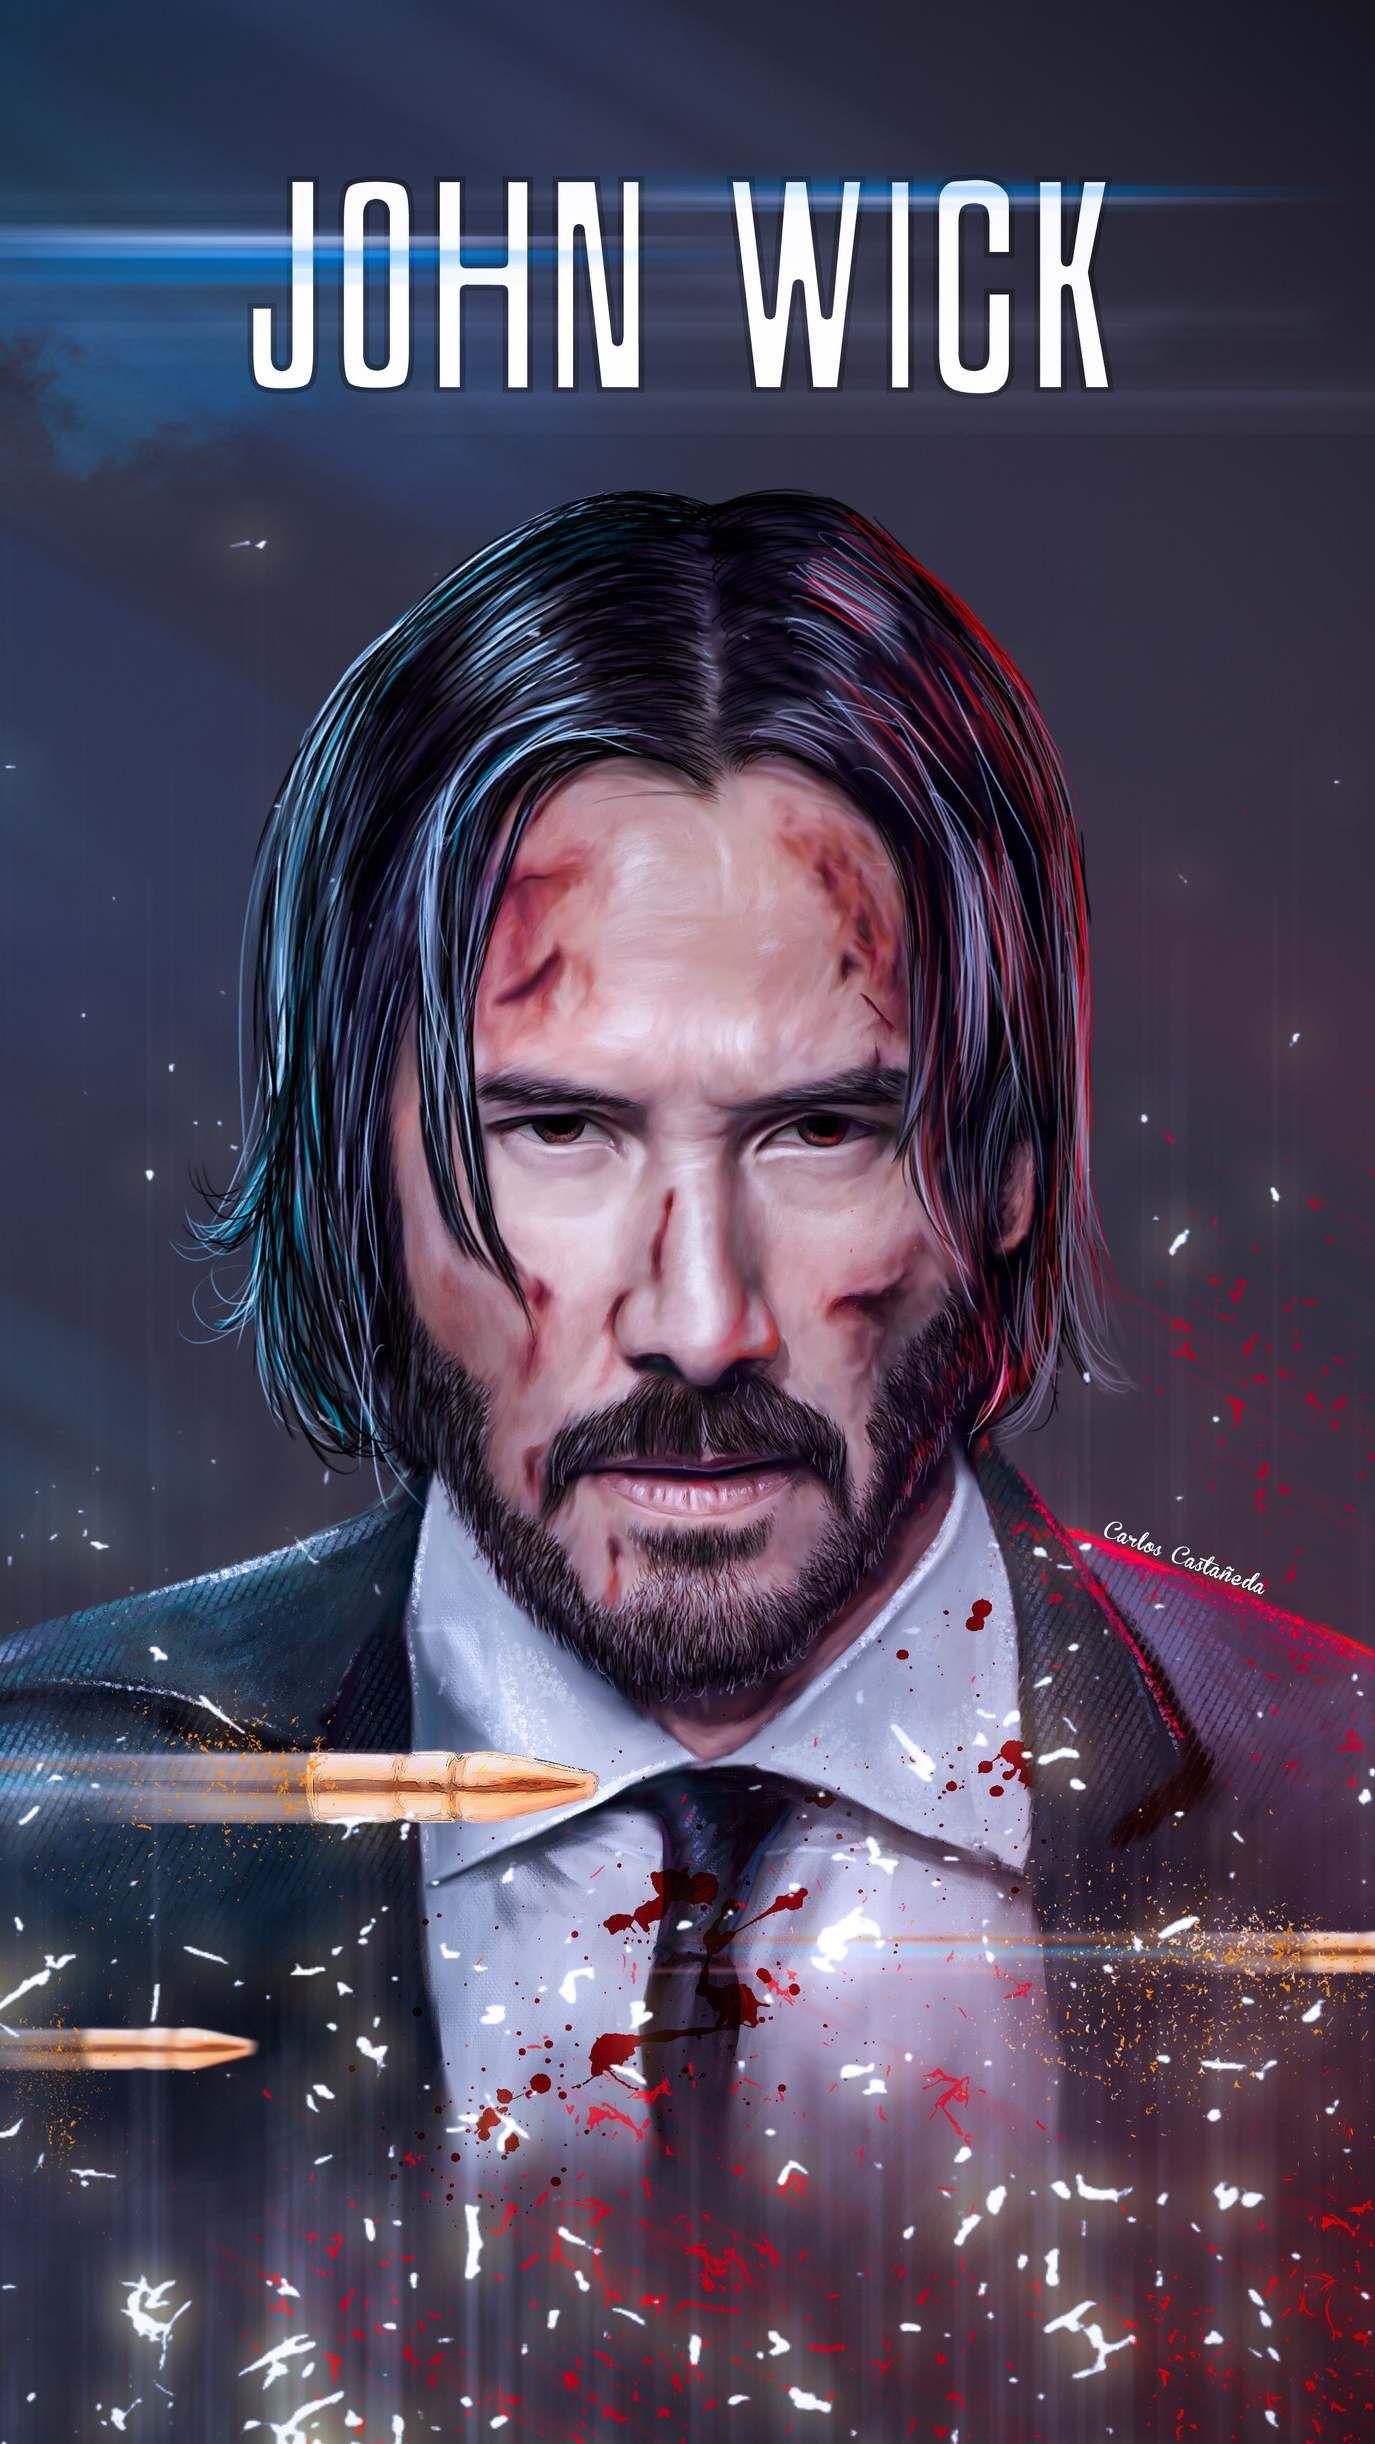 John Wick 3 Android Wallpapers - Wallpaper Cave